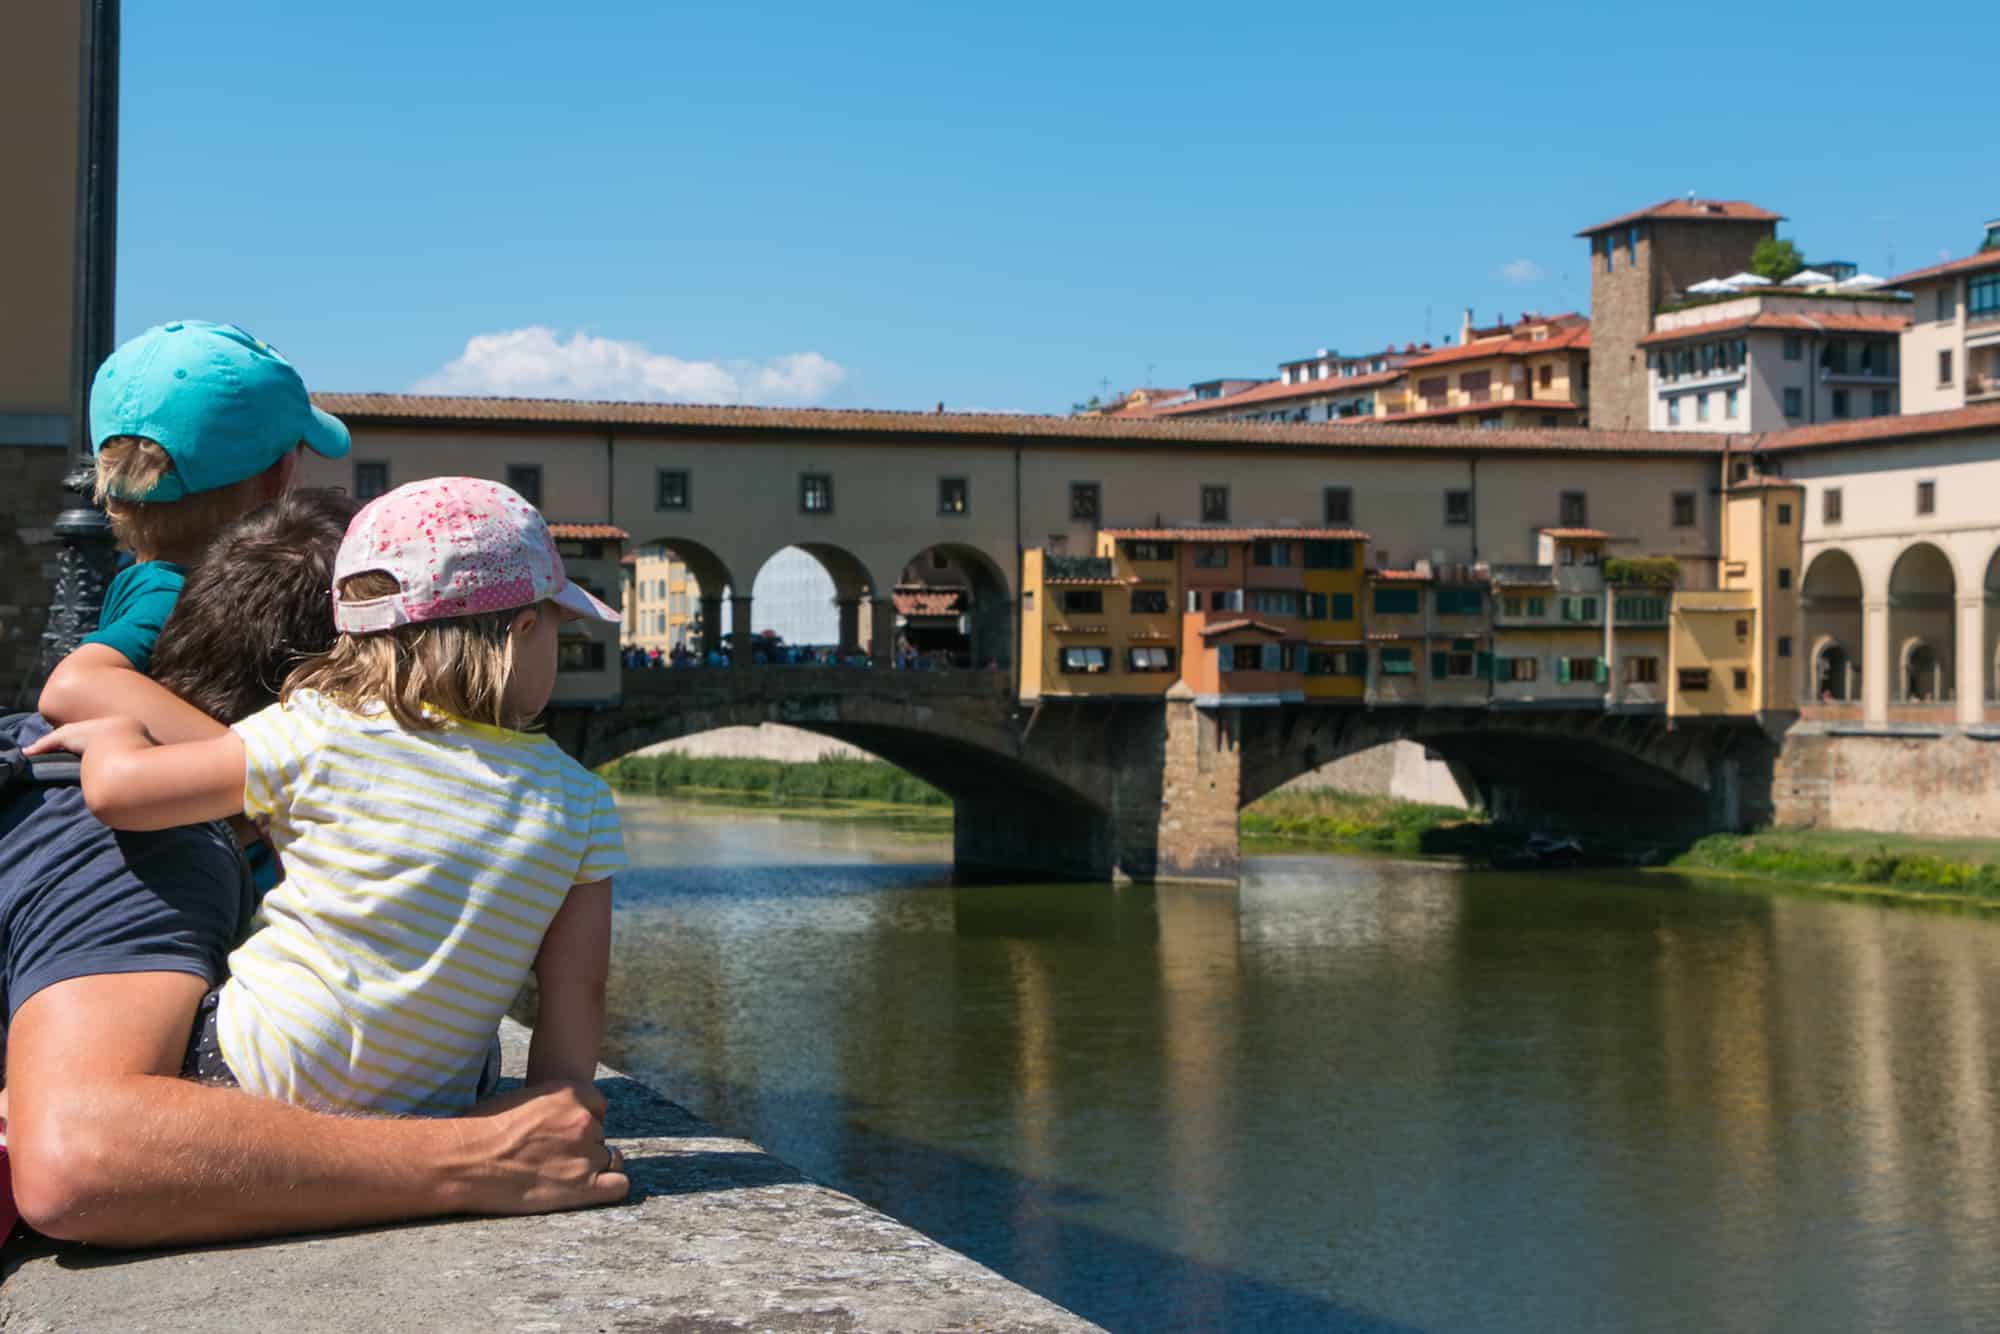 MEDICI FAMILY ART, POWER & DYNASTY IN FLORENCE - Europe for Kids Tours